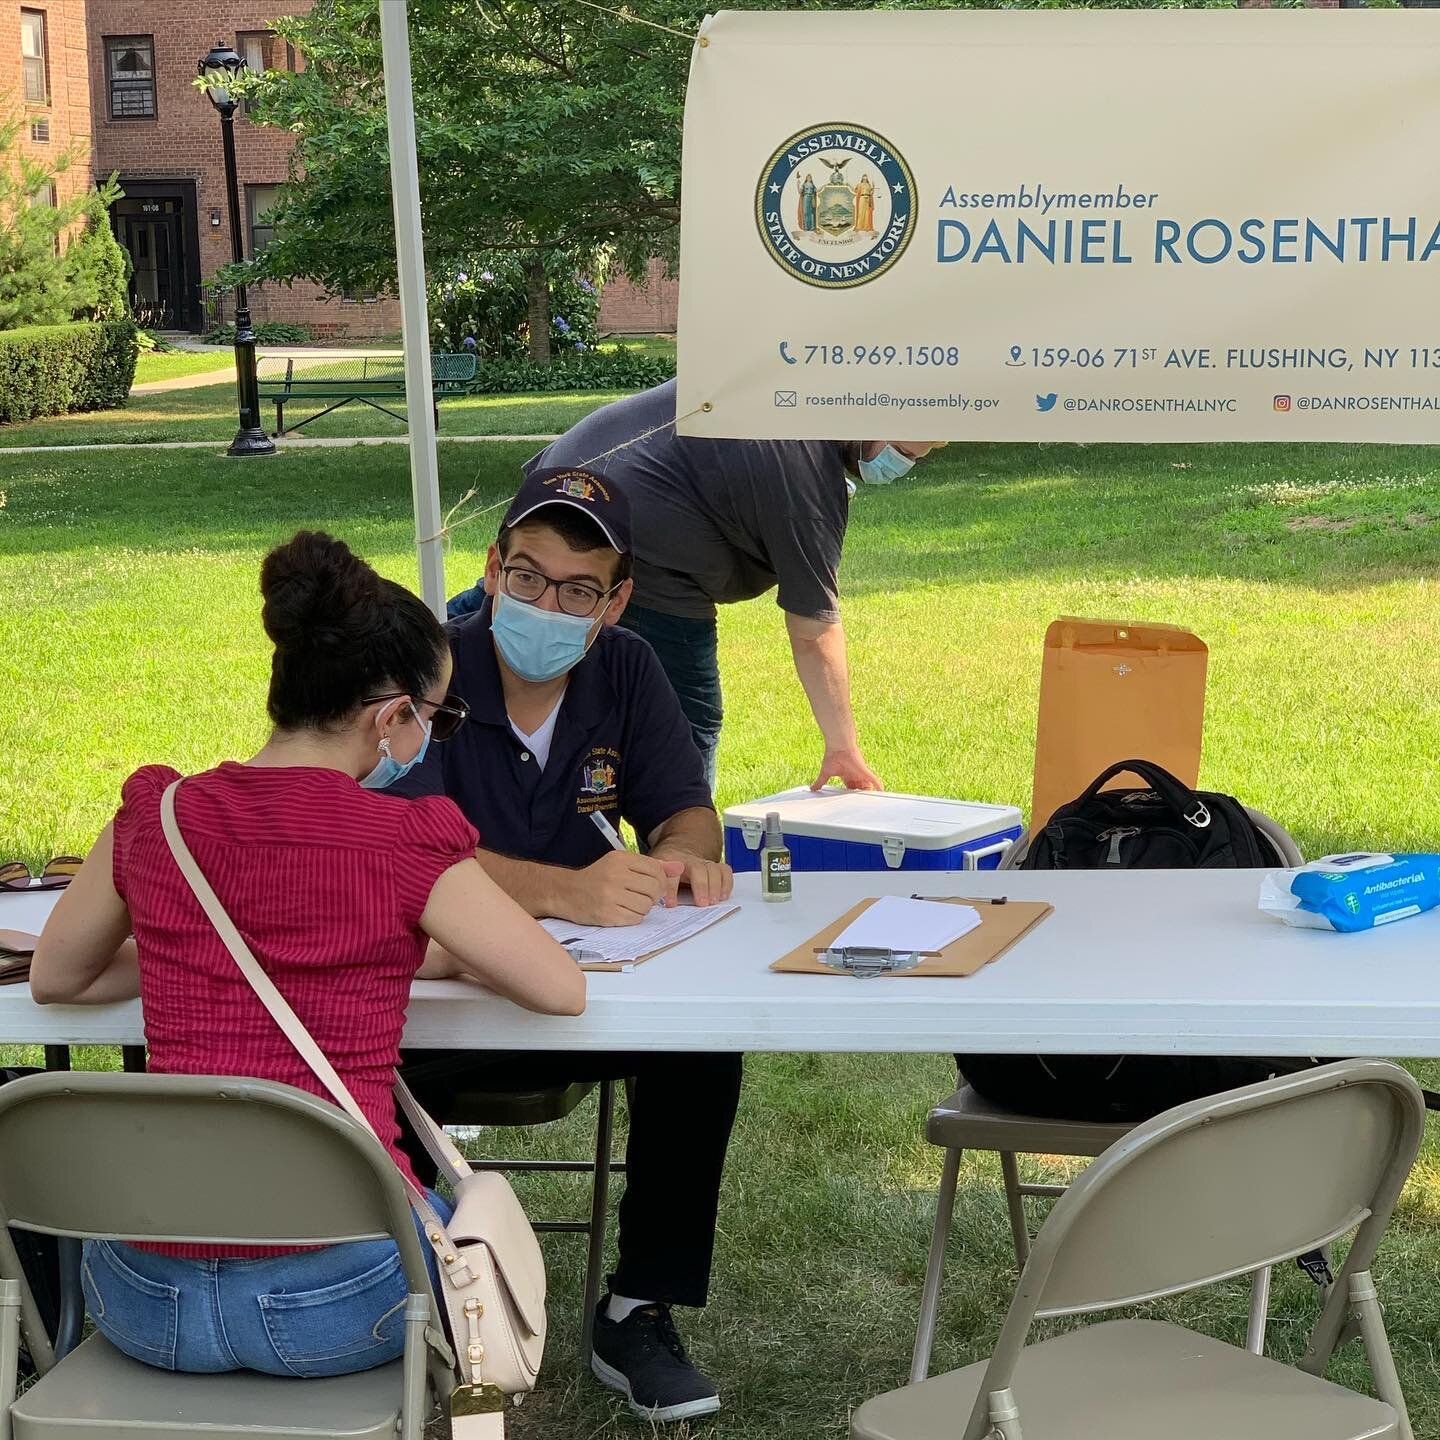 It&rsquo;s hot outside, but we&rsquo;re still here to help with affidavits! We will be providing income affidavit assistance until 6pm today. 

#electchester #affidavits #assistance #danielrosenthal #AD27 #local3